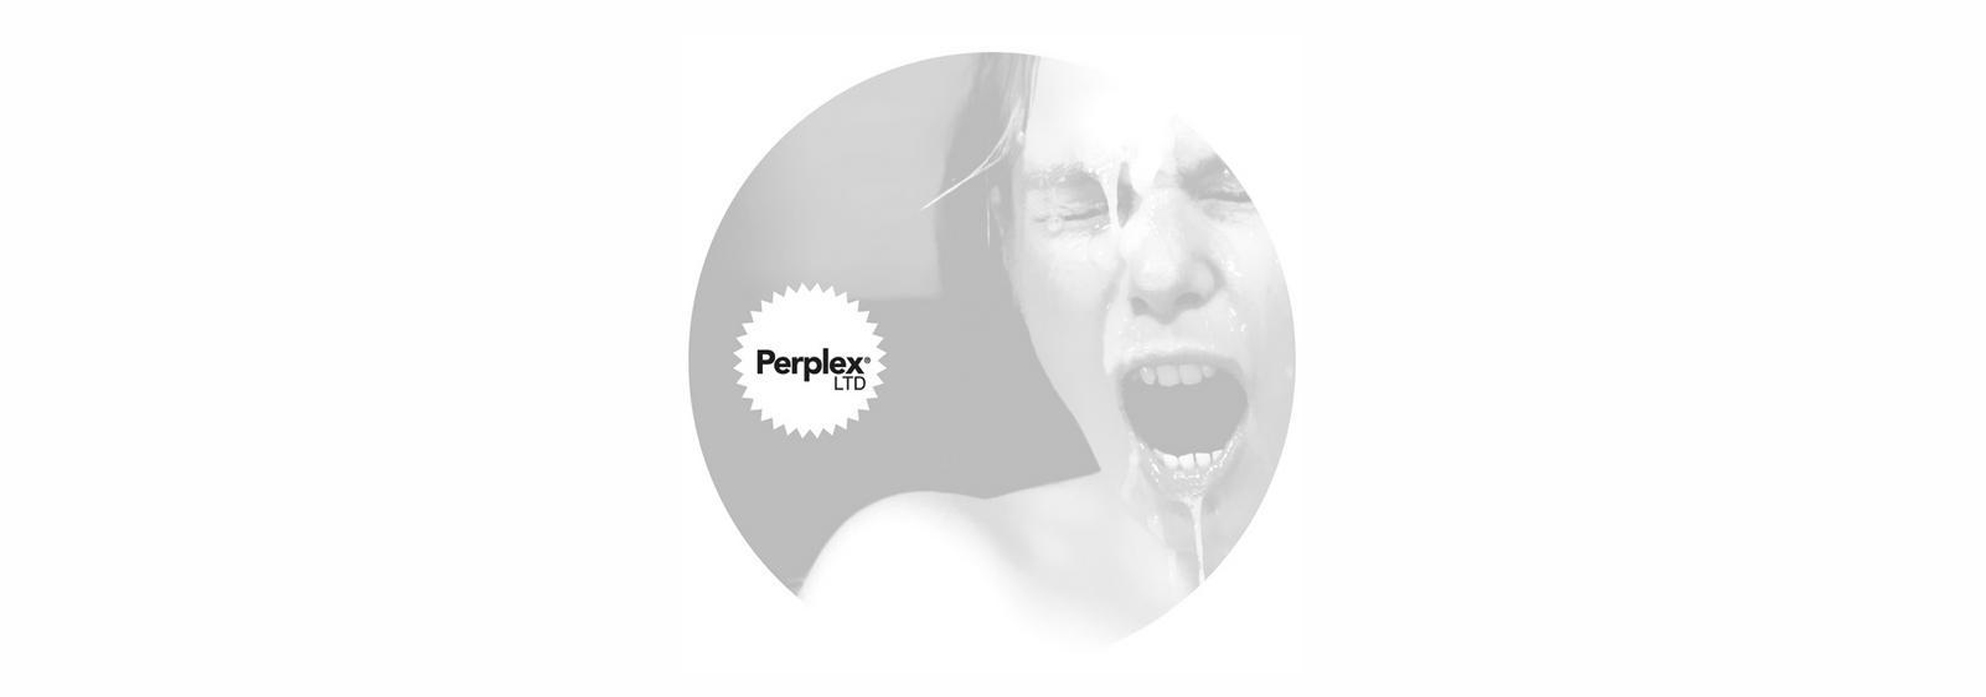 You are currently viewing Perplex recordings : Come in your face